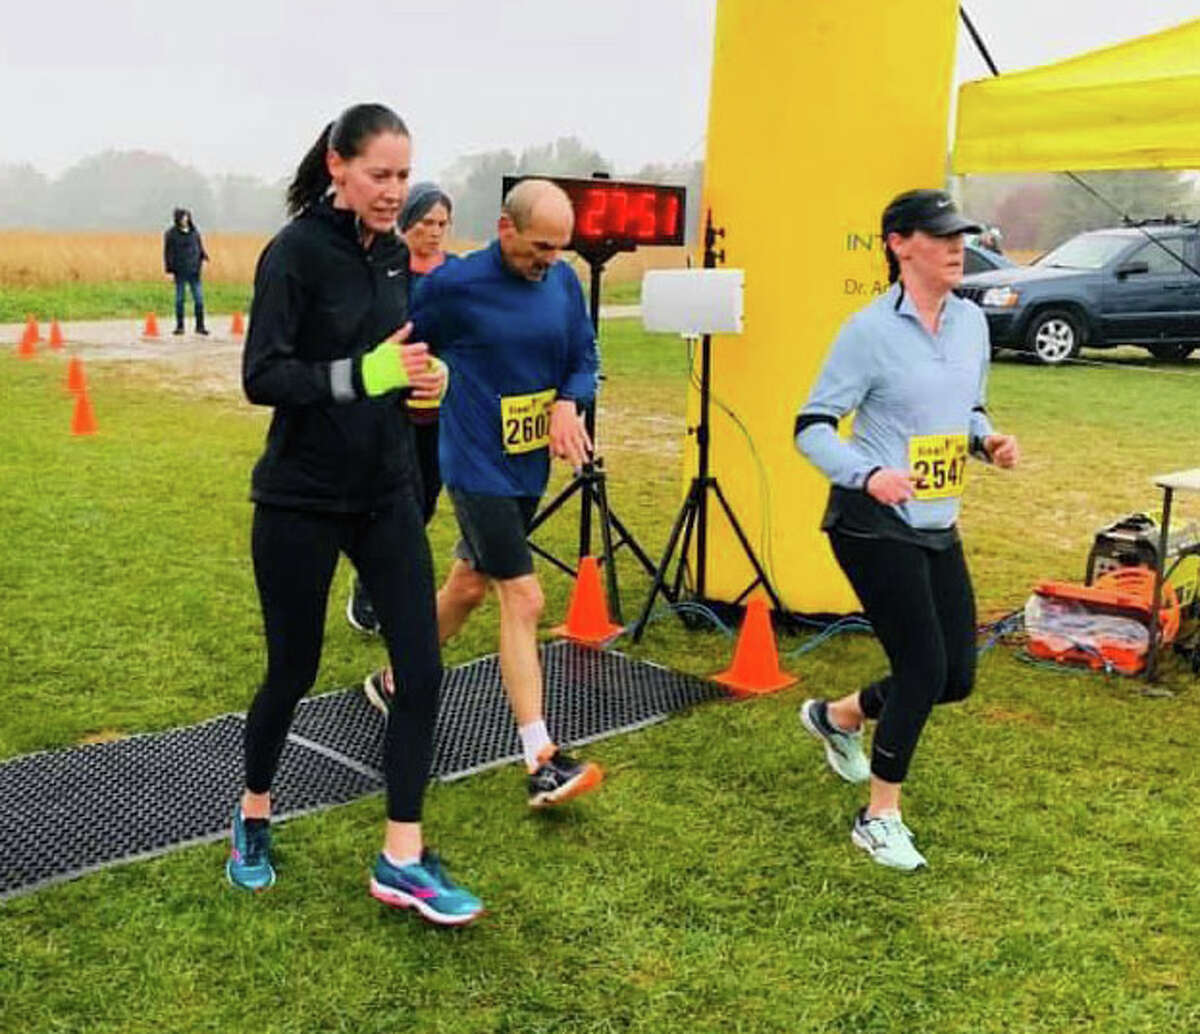 Runners compete in a previous version of the Golden Apple 5K at Liberty Apple Orchard in Edwardsville. This year’s race will be held on Sept. 24 and will benefit pediatric cancer research and services through the American Cancer Society.